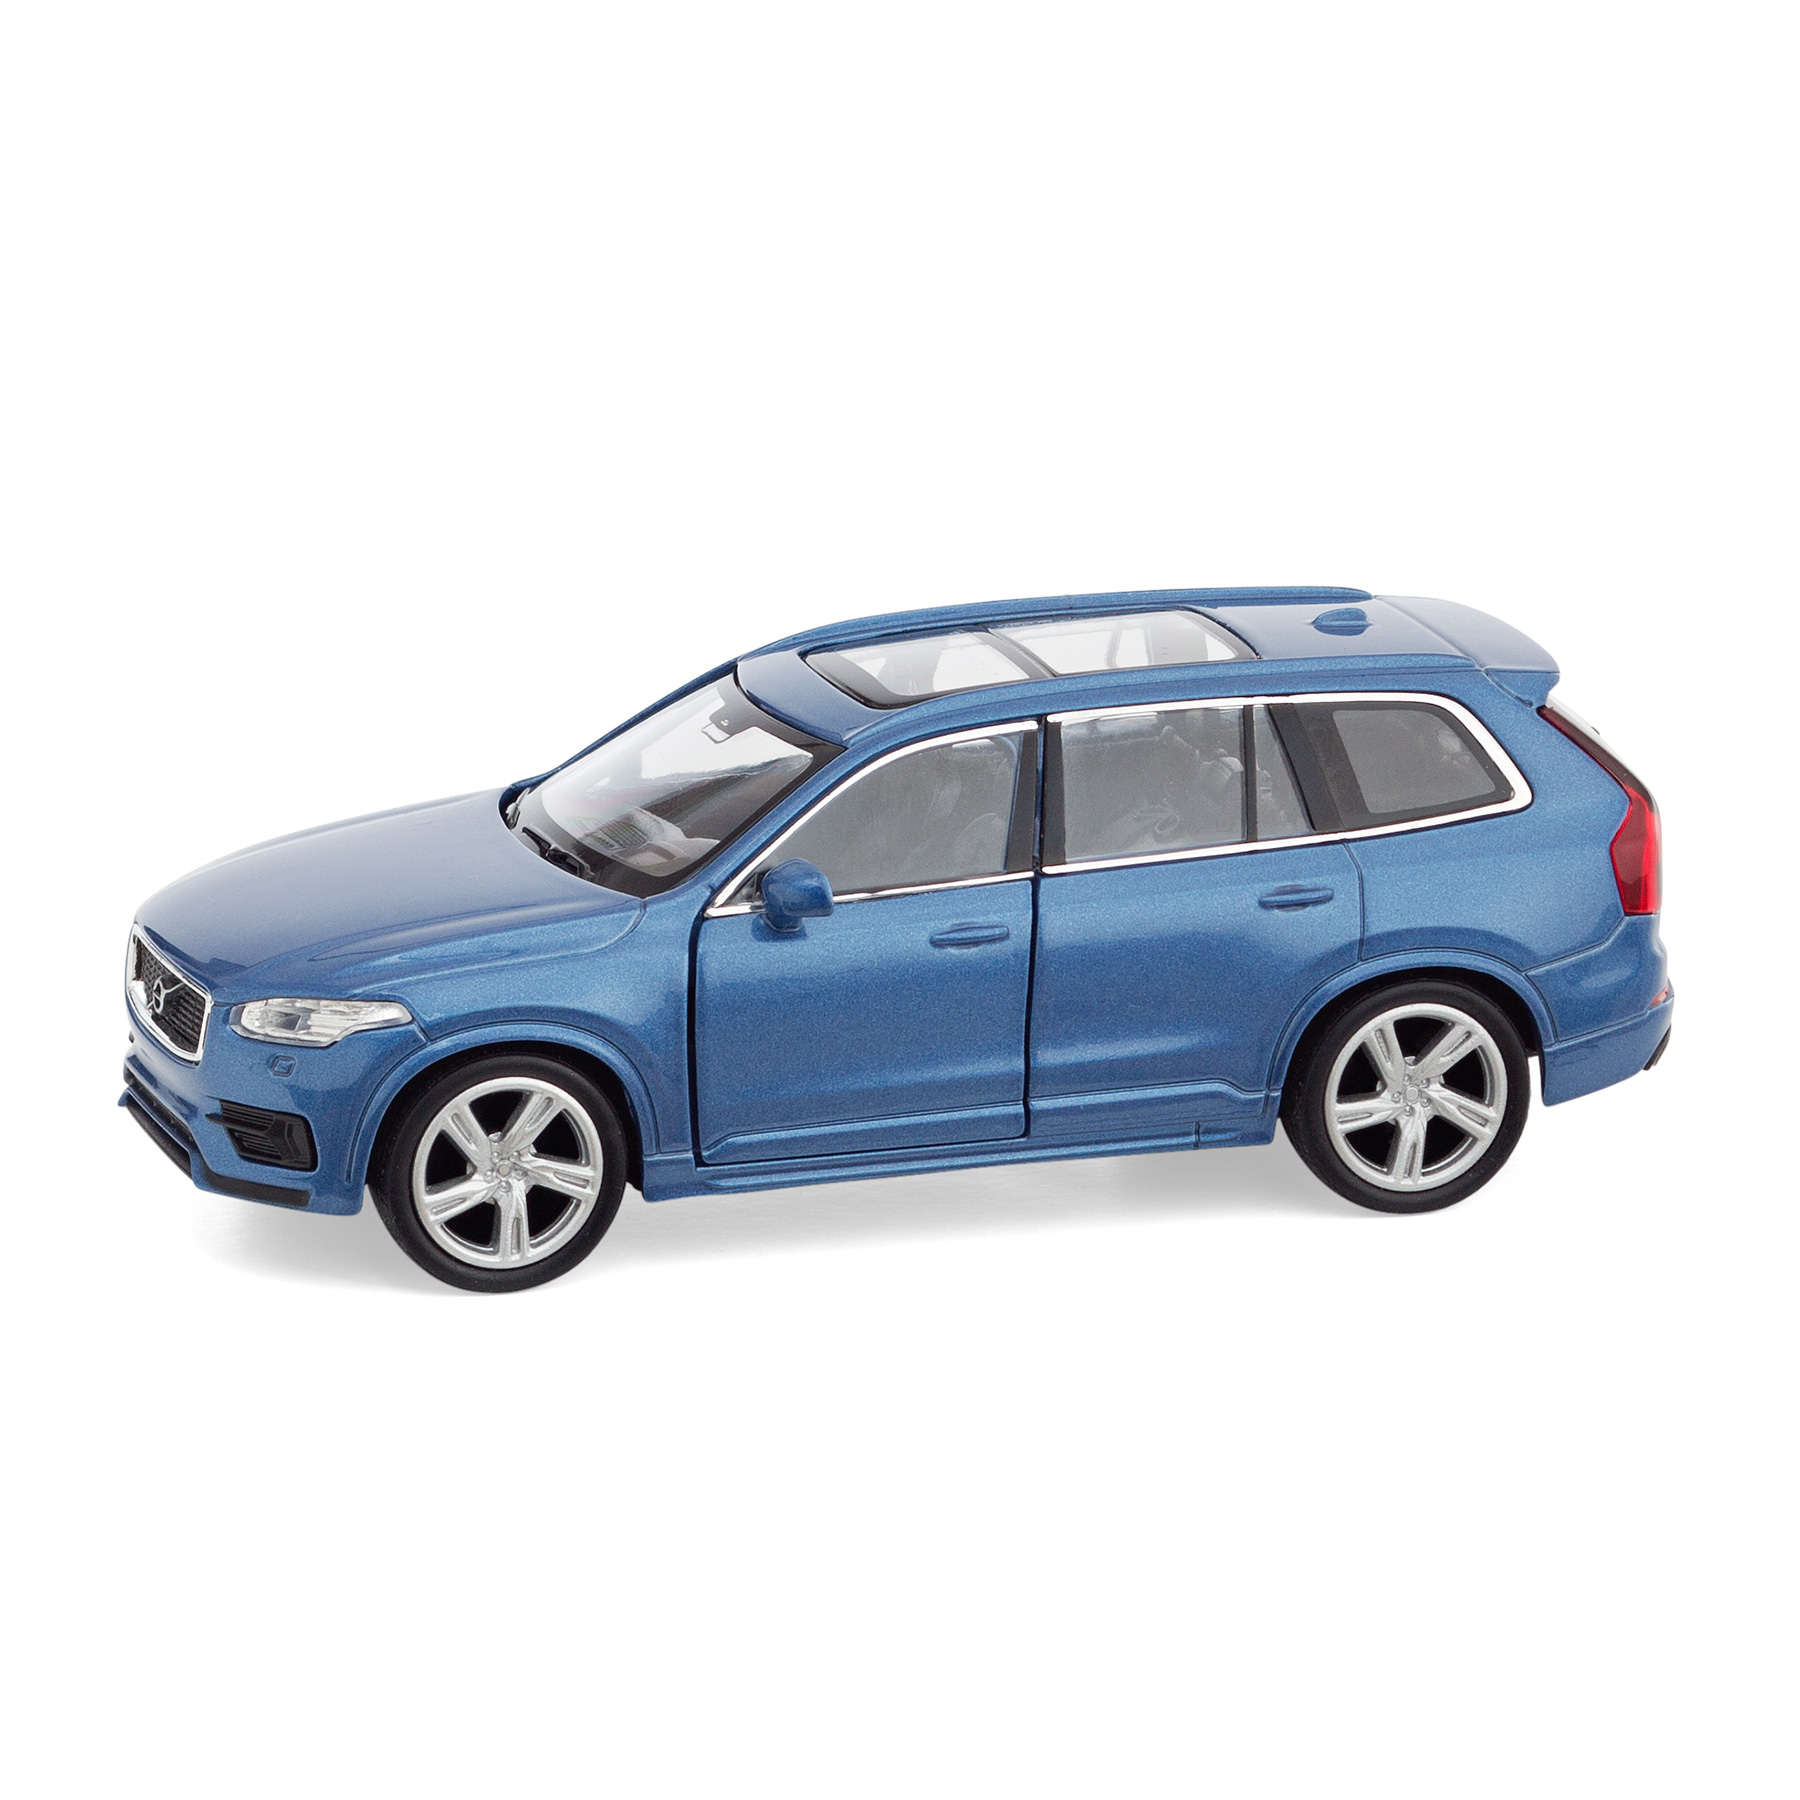 Volvo Car Lifestyle Collection Shop. XC90 Toy Car 1:38